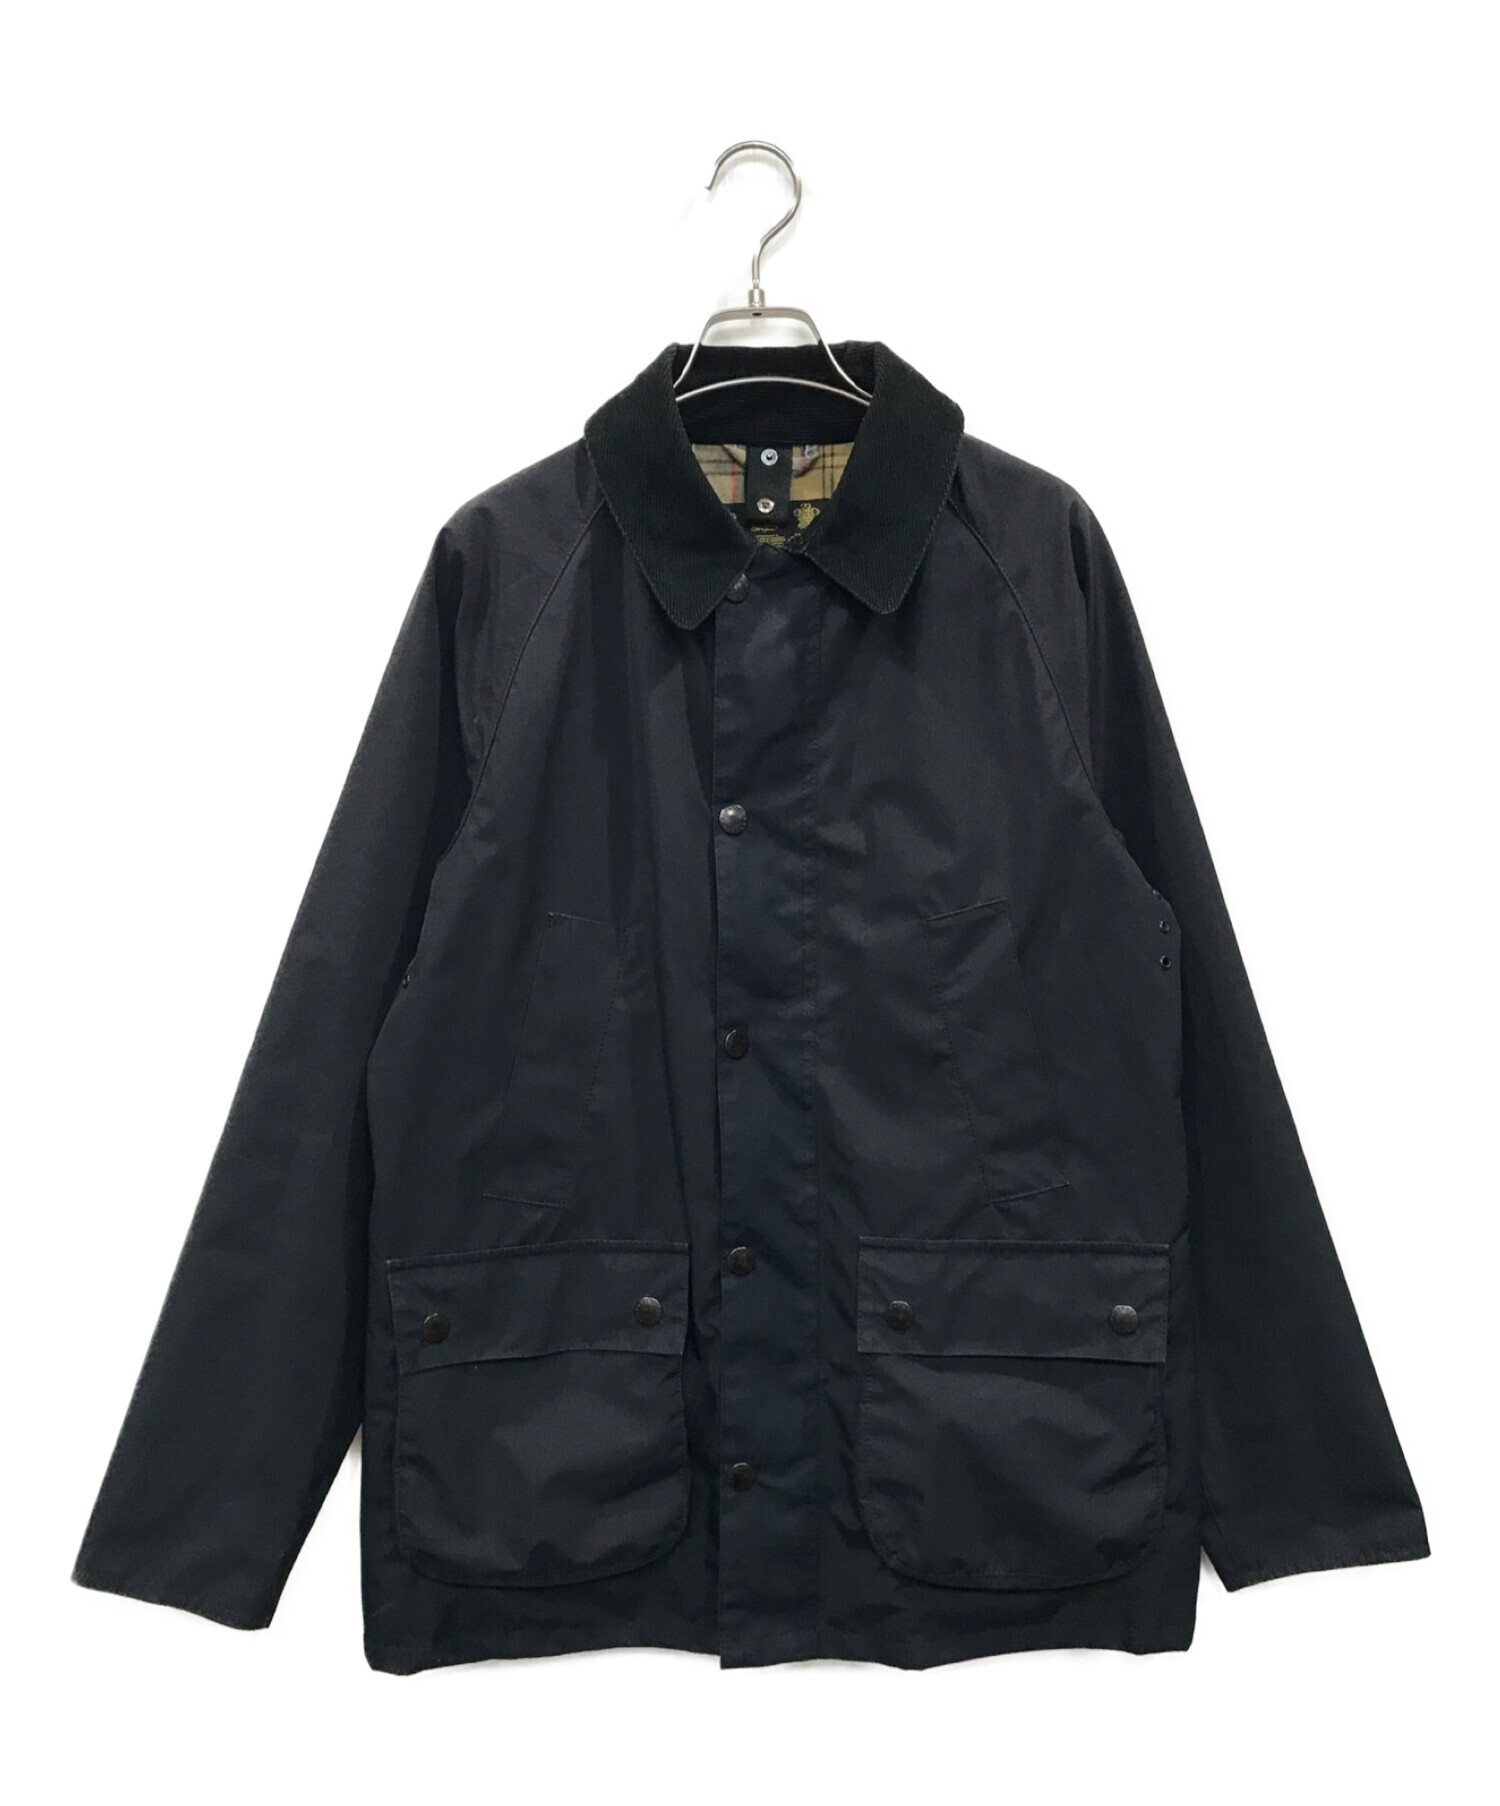 Barbour SL BEDALE NAVY 38